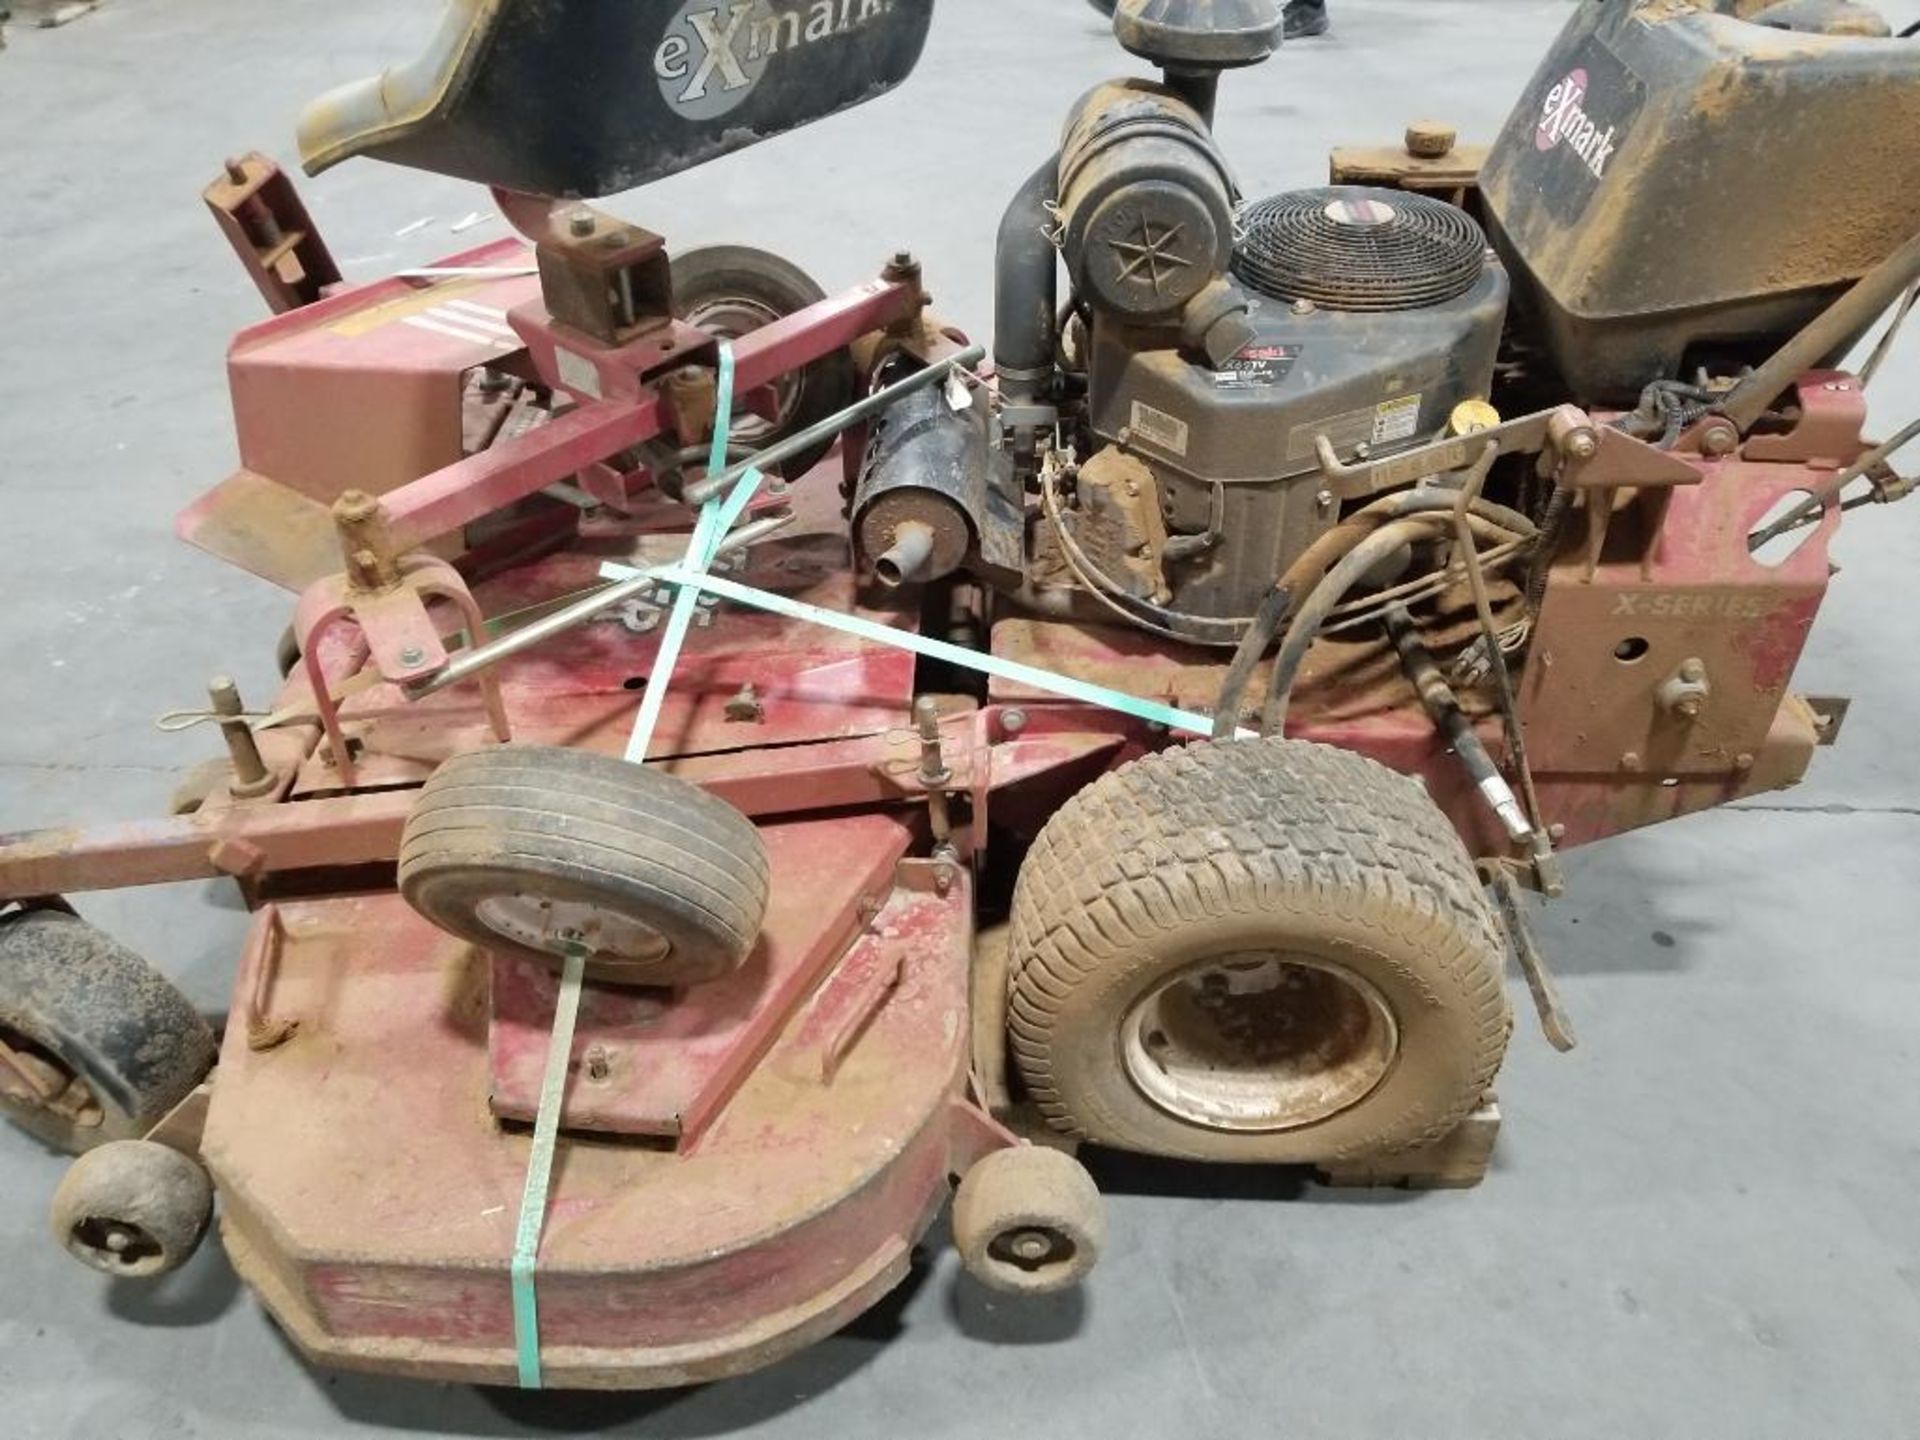 60in Exmark walk behind mower. Kawasaki 22hp engine. Working condition unknown. Battery is dead. - Image 12 of 20